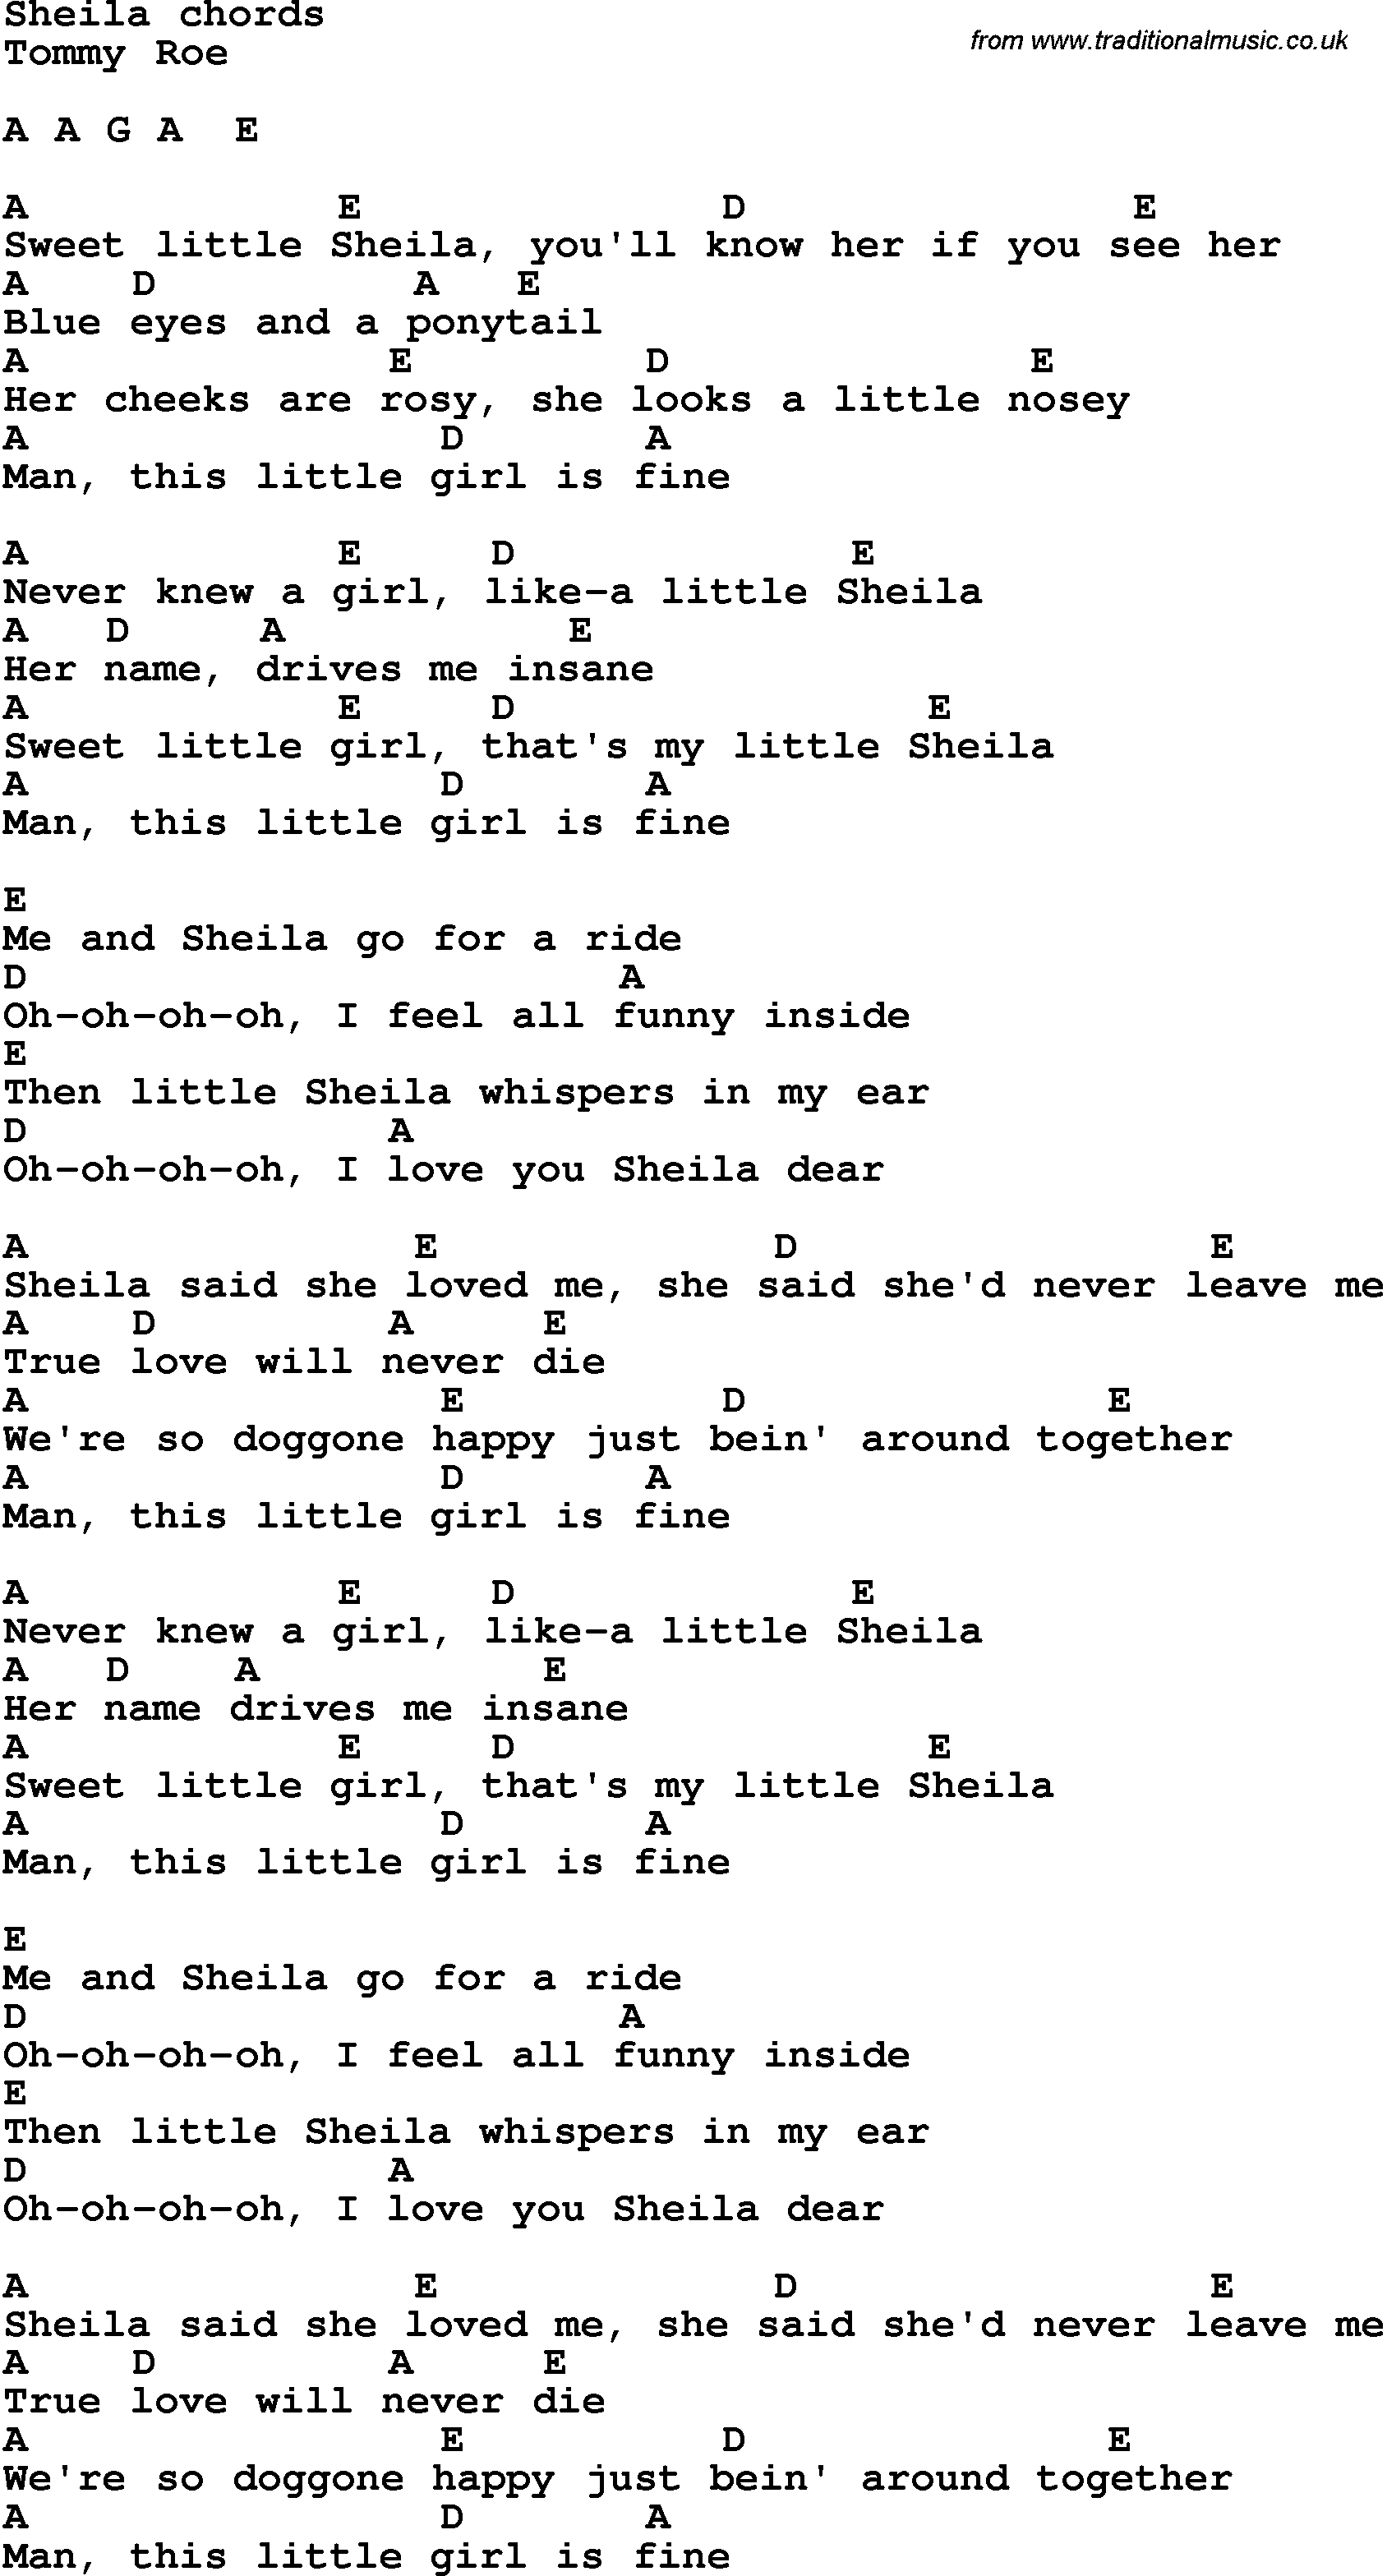 Song Lyrics with guitar chords for Sheila